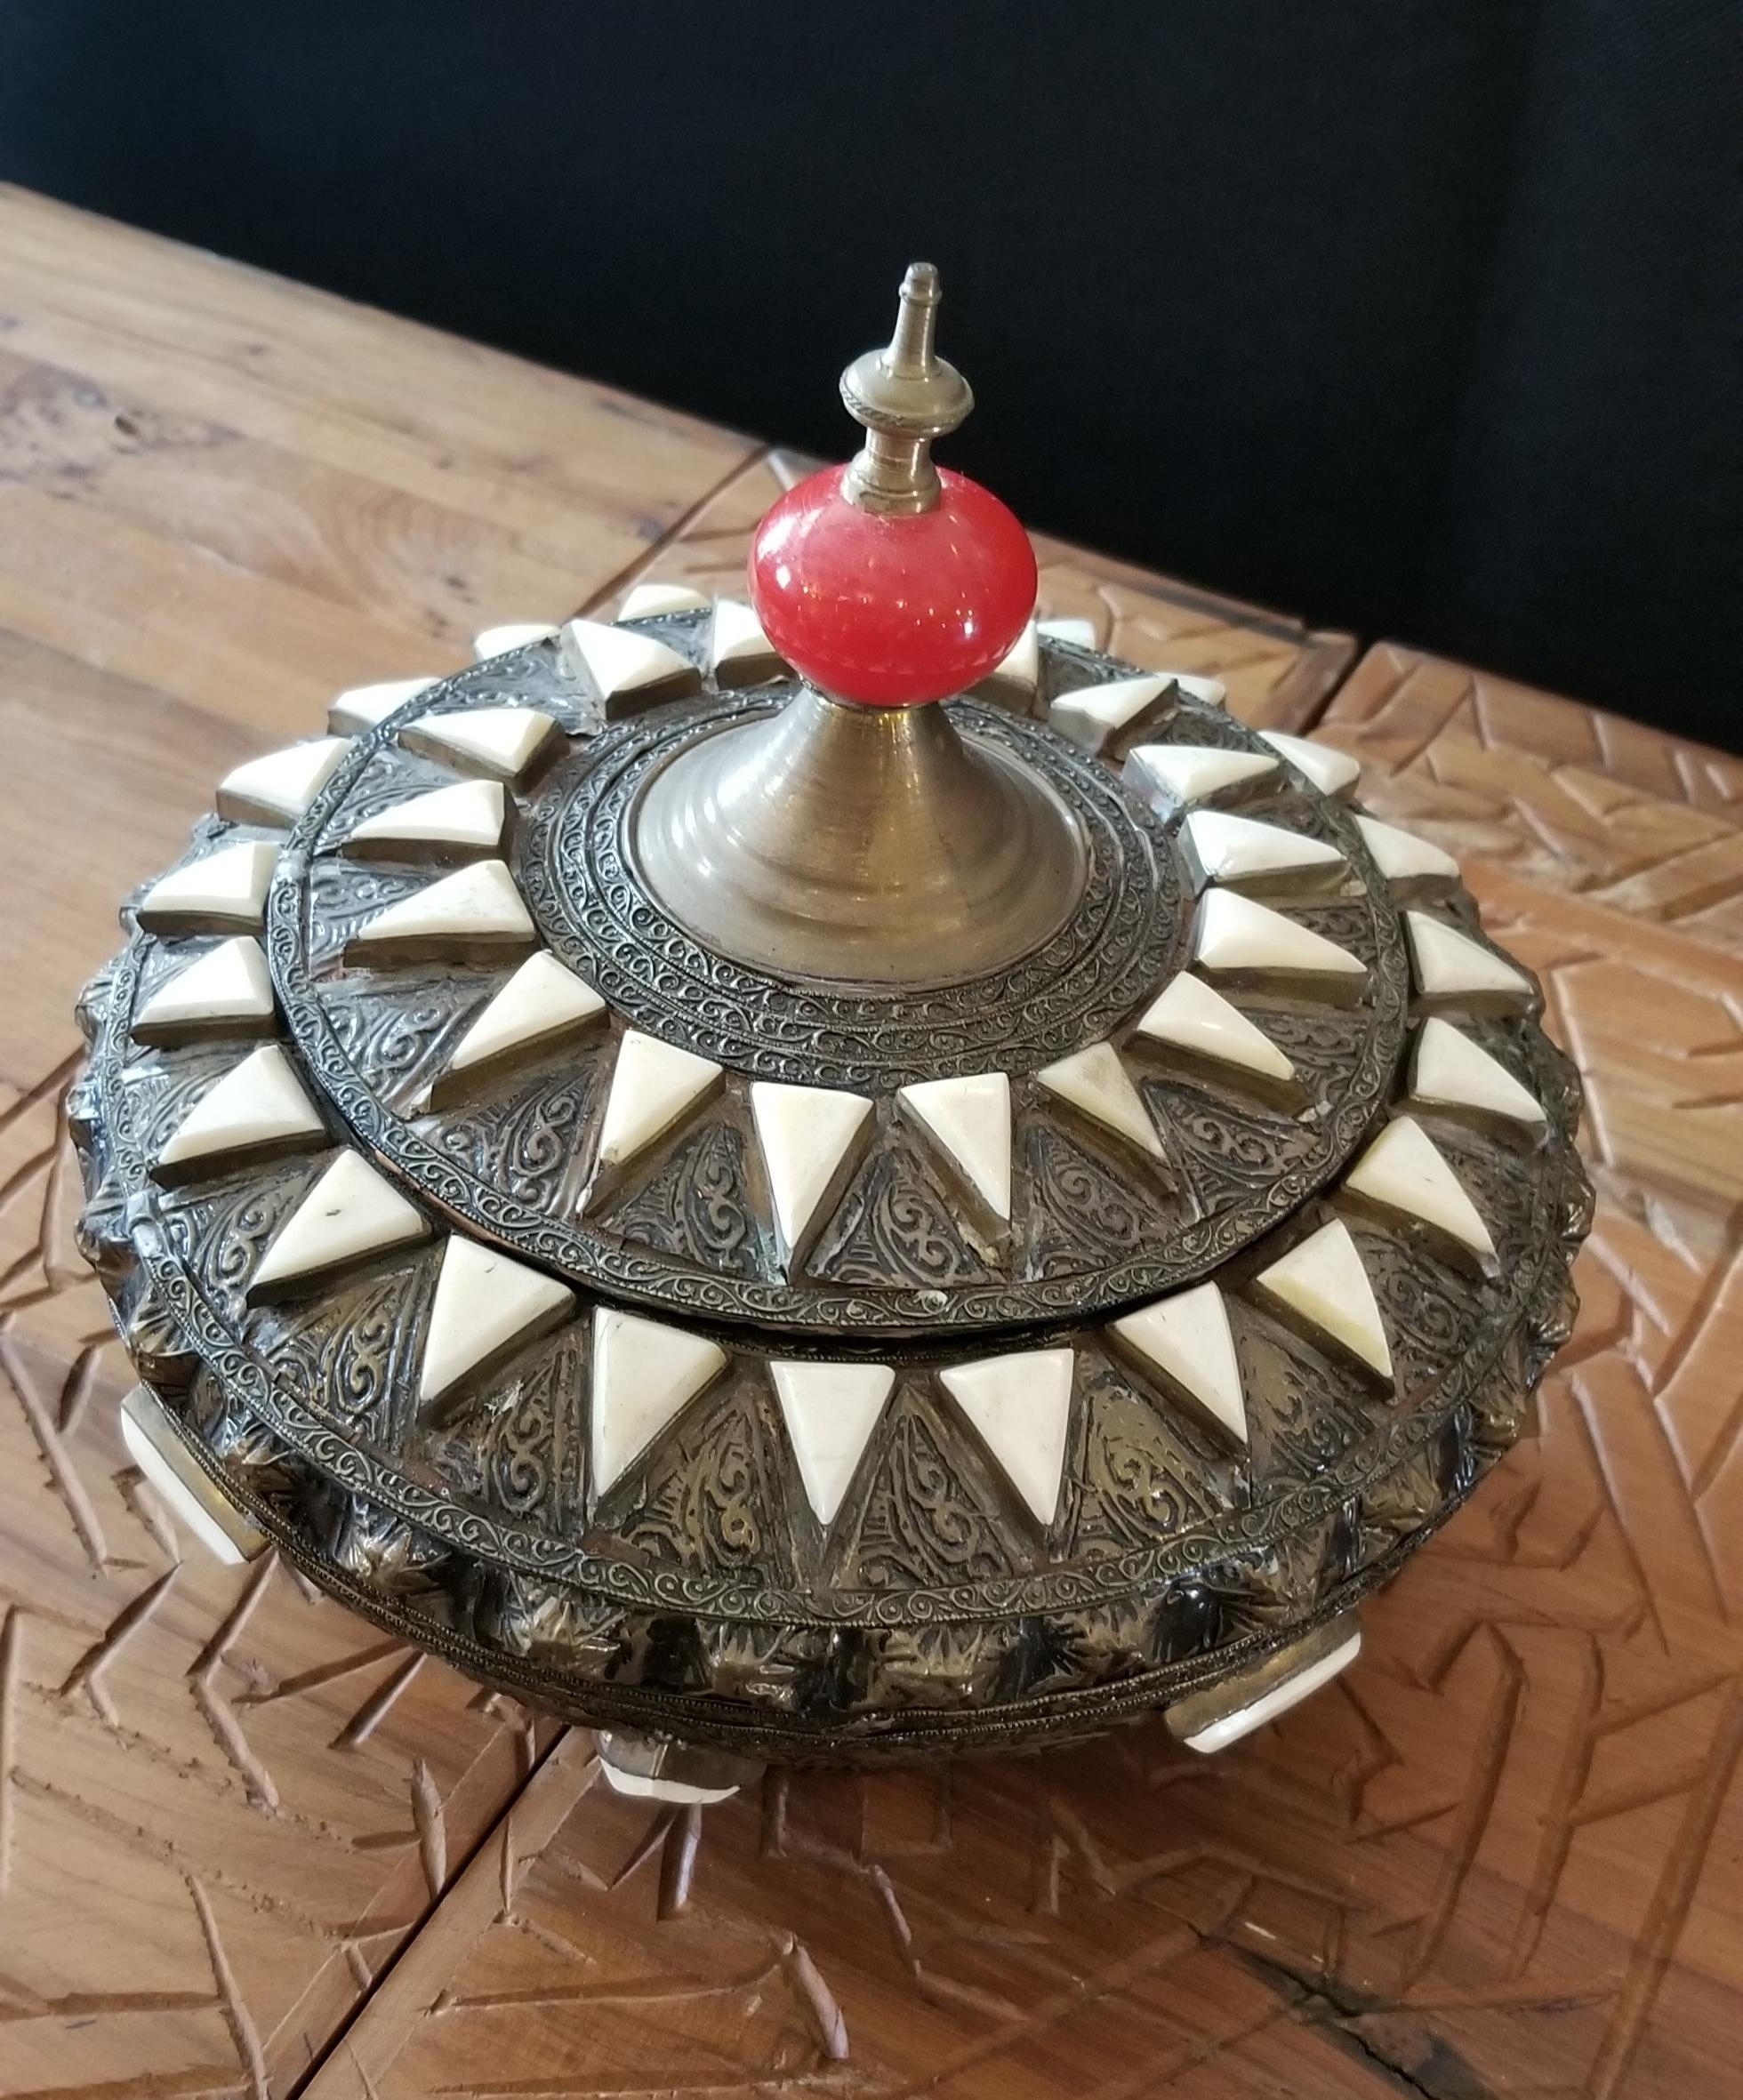 In remarkable condition.
Made from metal and inlaid with camel bone fragments, this beautiful Moroccan tobacco / spice box is a few decades old, and has a few signs of signs of wear and tear. Great for decoration with its amazing patterns